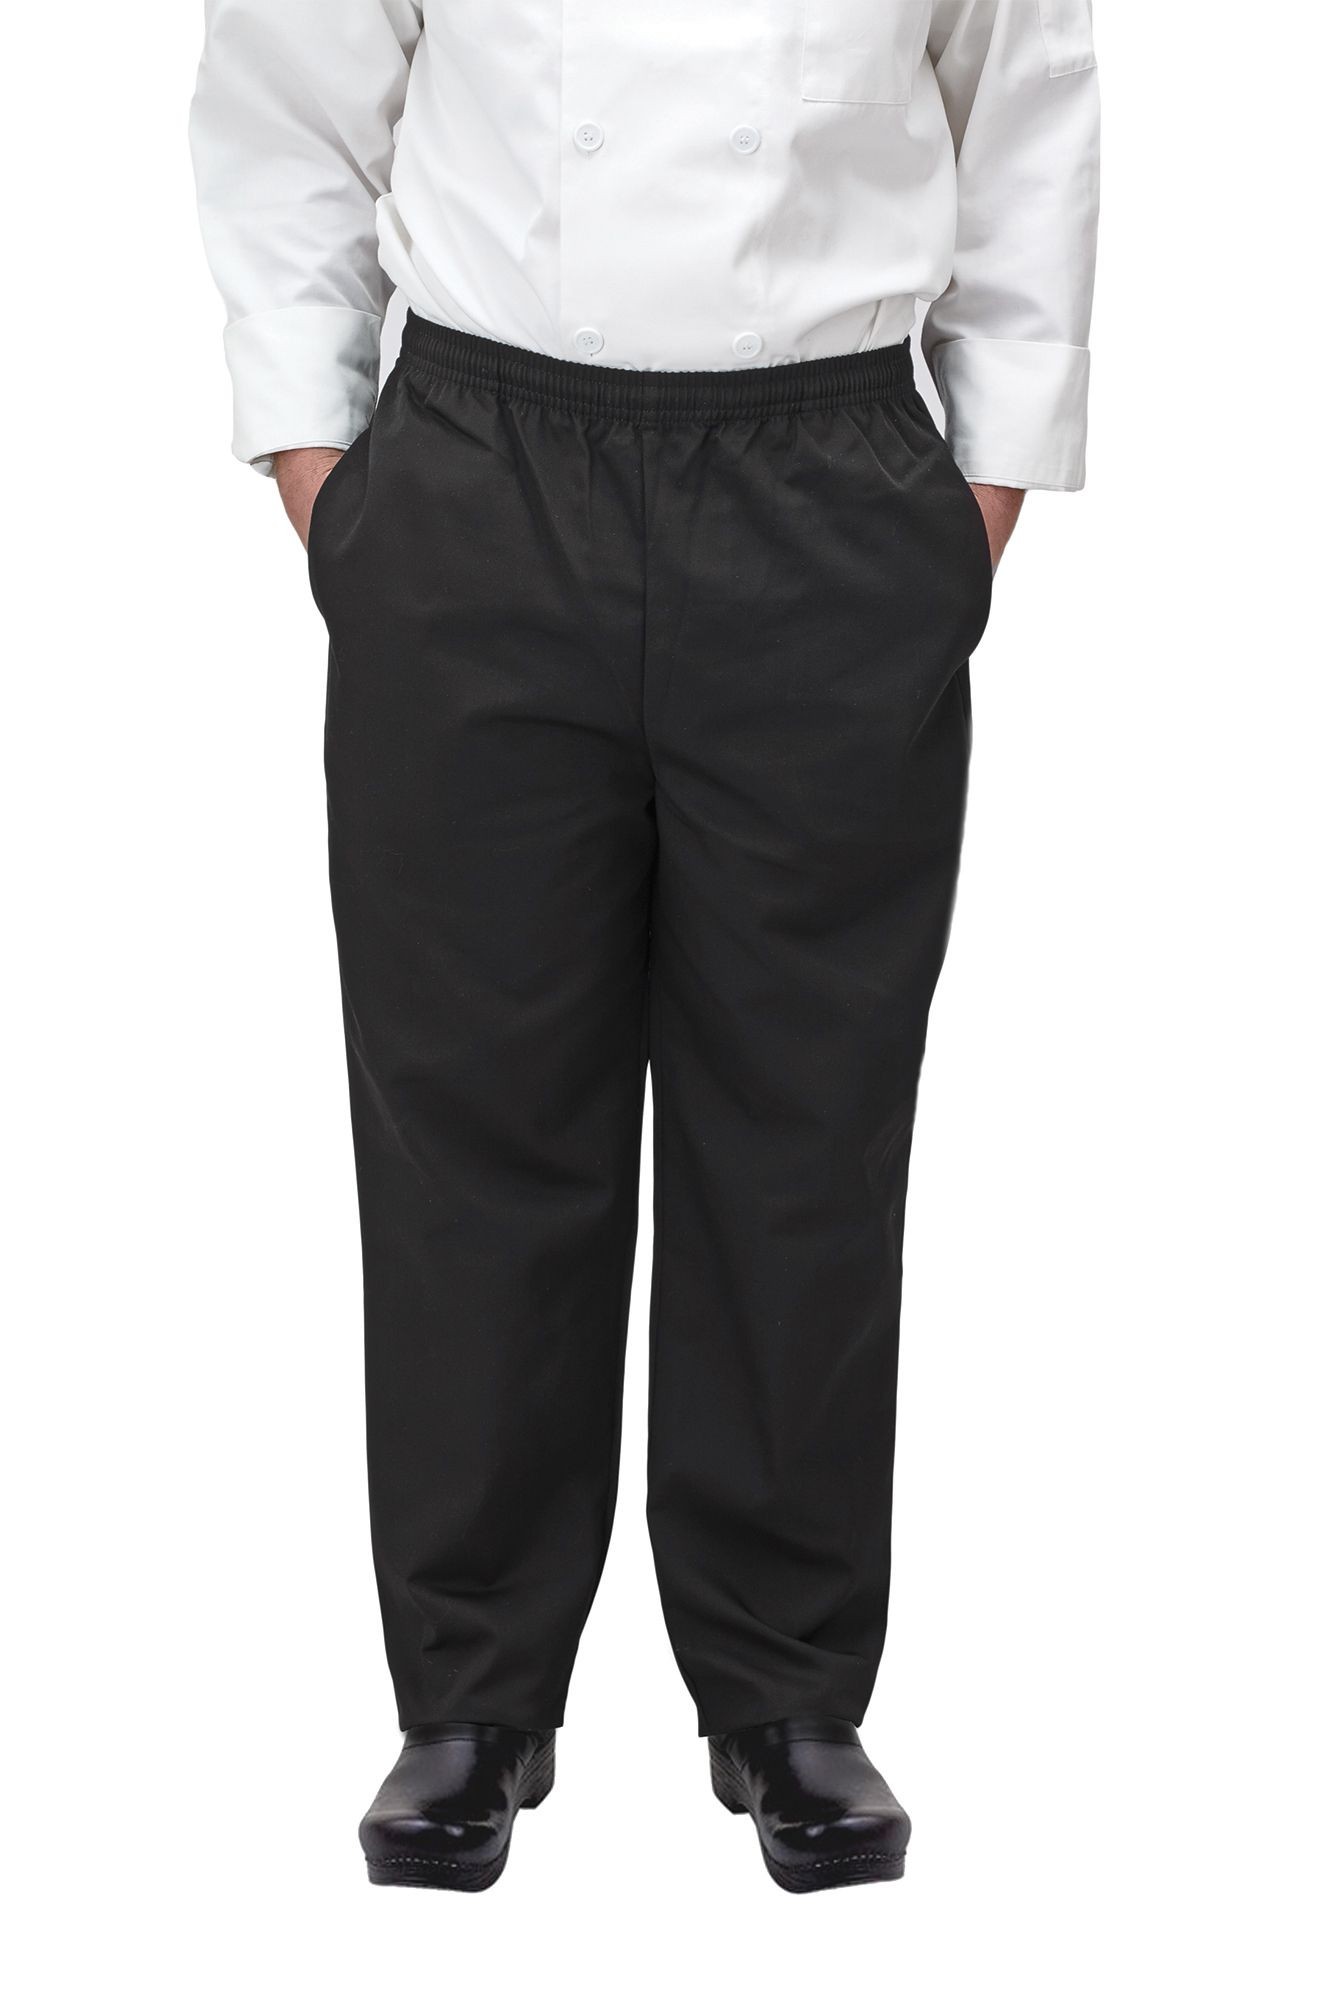 Winco UNF-2KM Black Poly-Cotton Blend Relaxed Fit Chef Pants, Medium